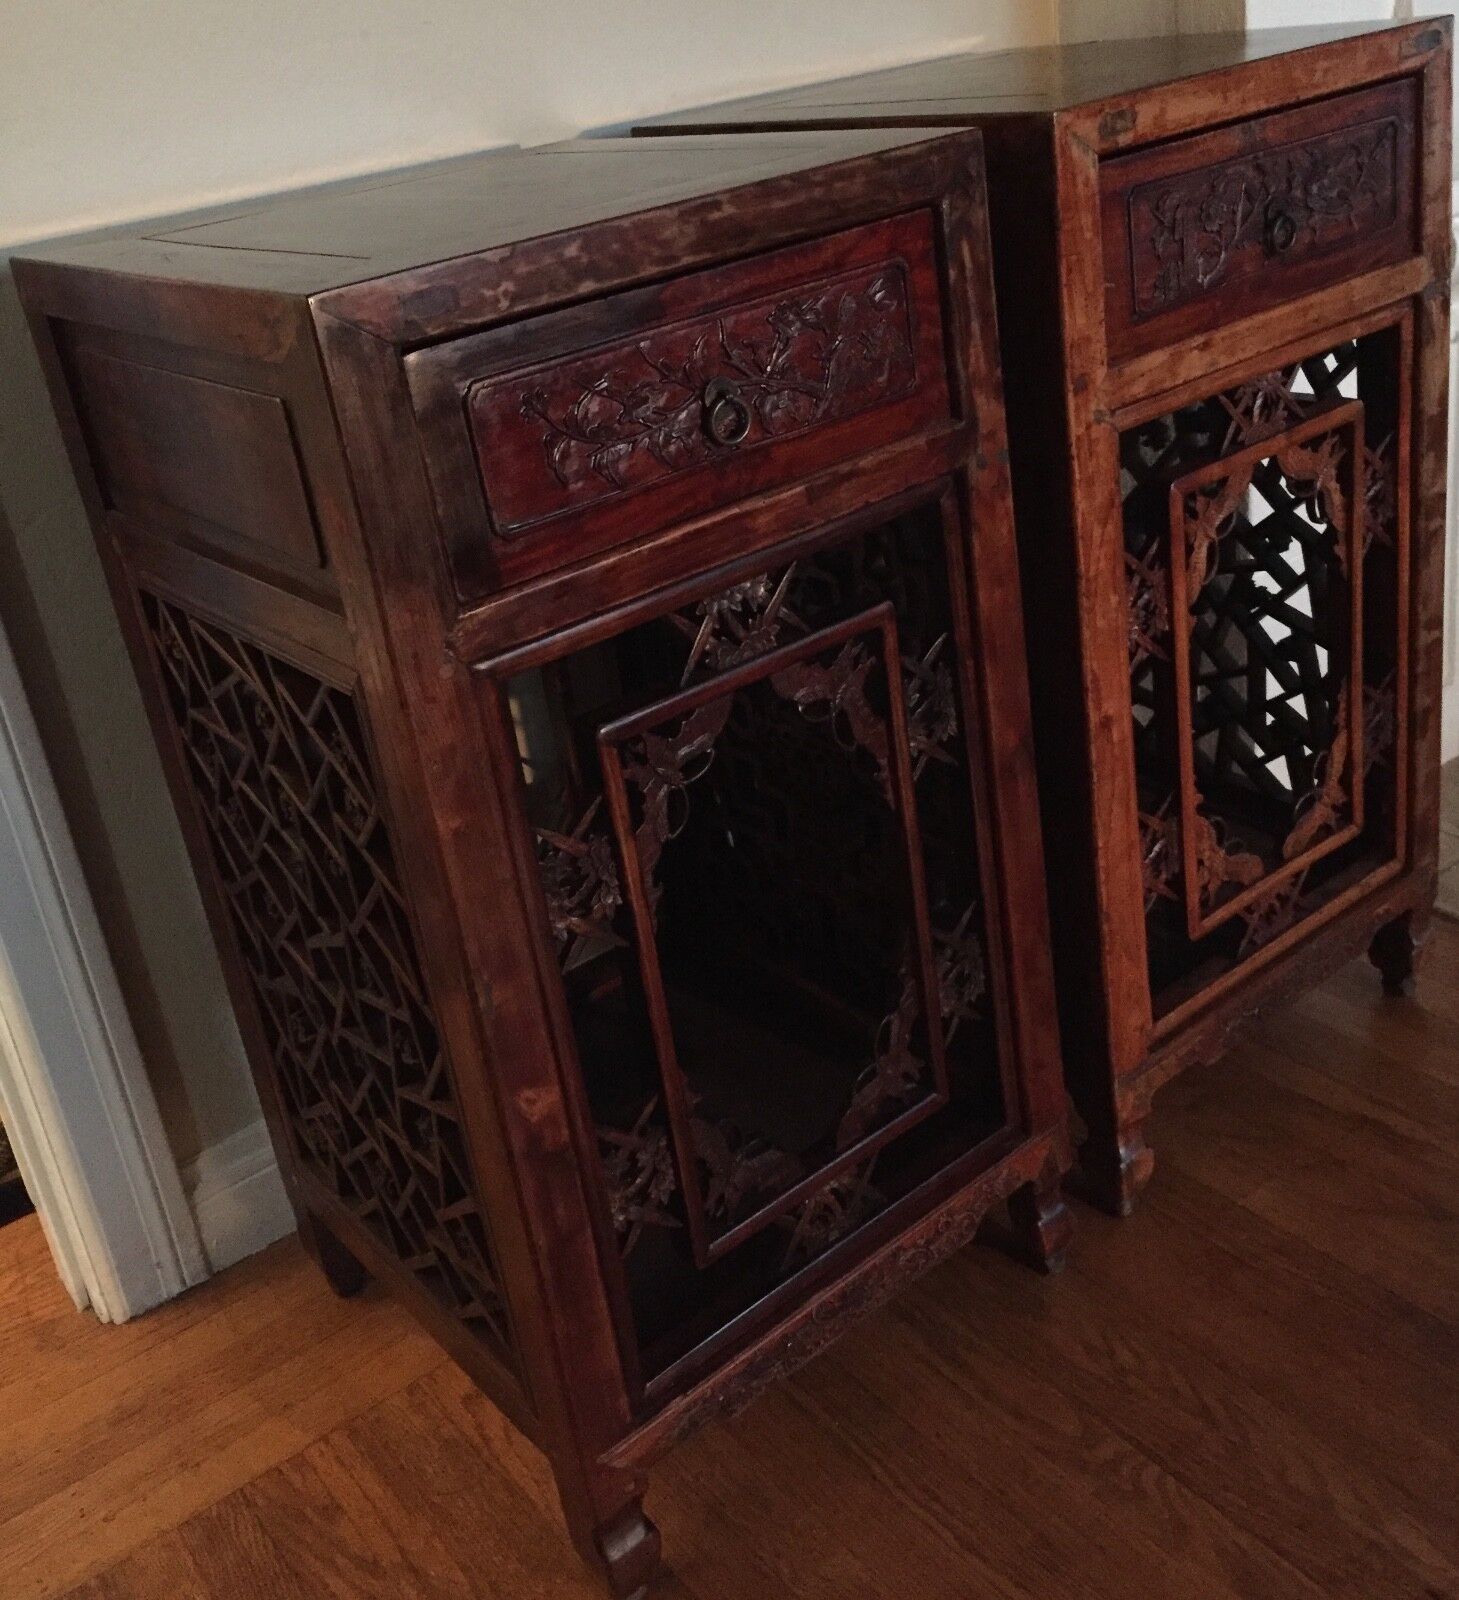 Antique Carved Chinese Side Tables, Qing Period, circa 1870 - a Pair Без бренда - фотография #7